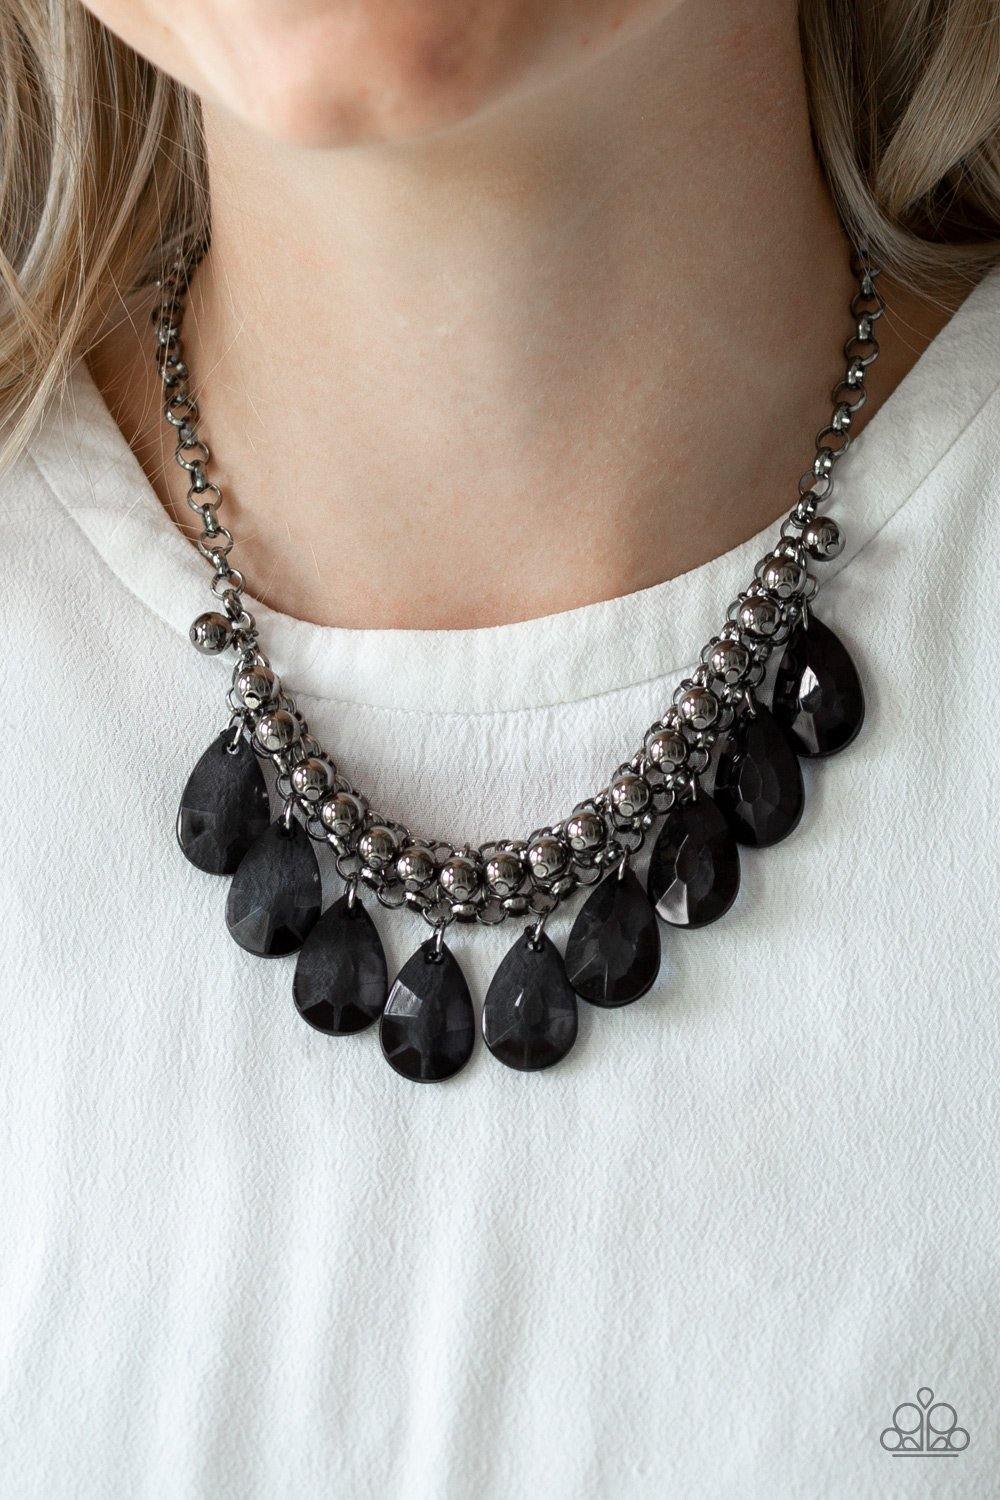 Fashionista Flair - Black Necklace - Paparazzi Accessories - Sassysblingandthings